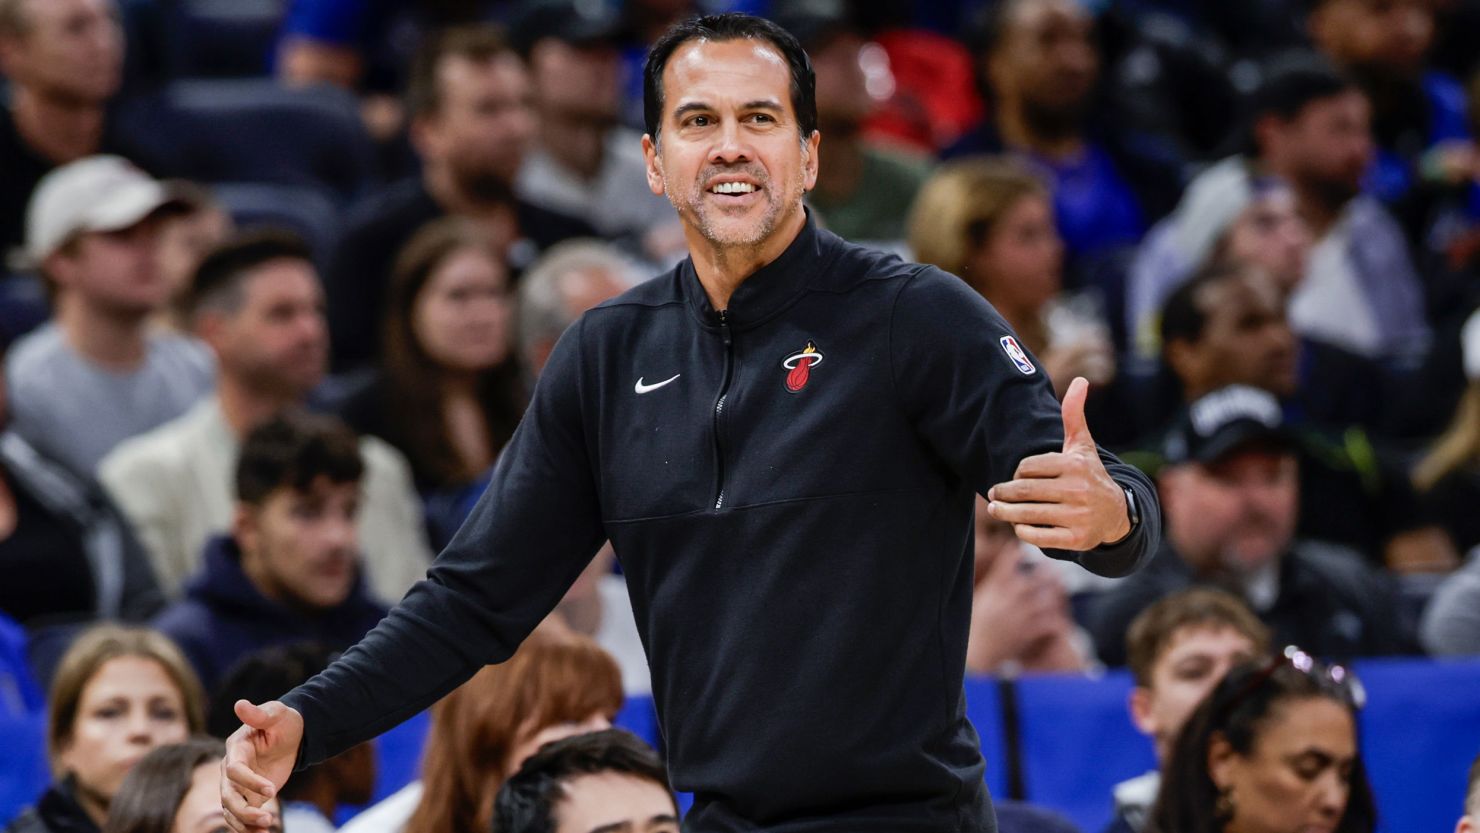  Miami Heat Shakes Up NBA Playoffs Coach Spoelstra Leads Underdog Victory Against Celtics in Game 2---